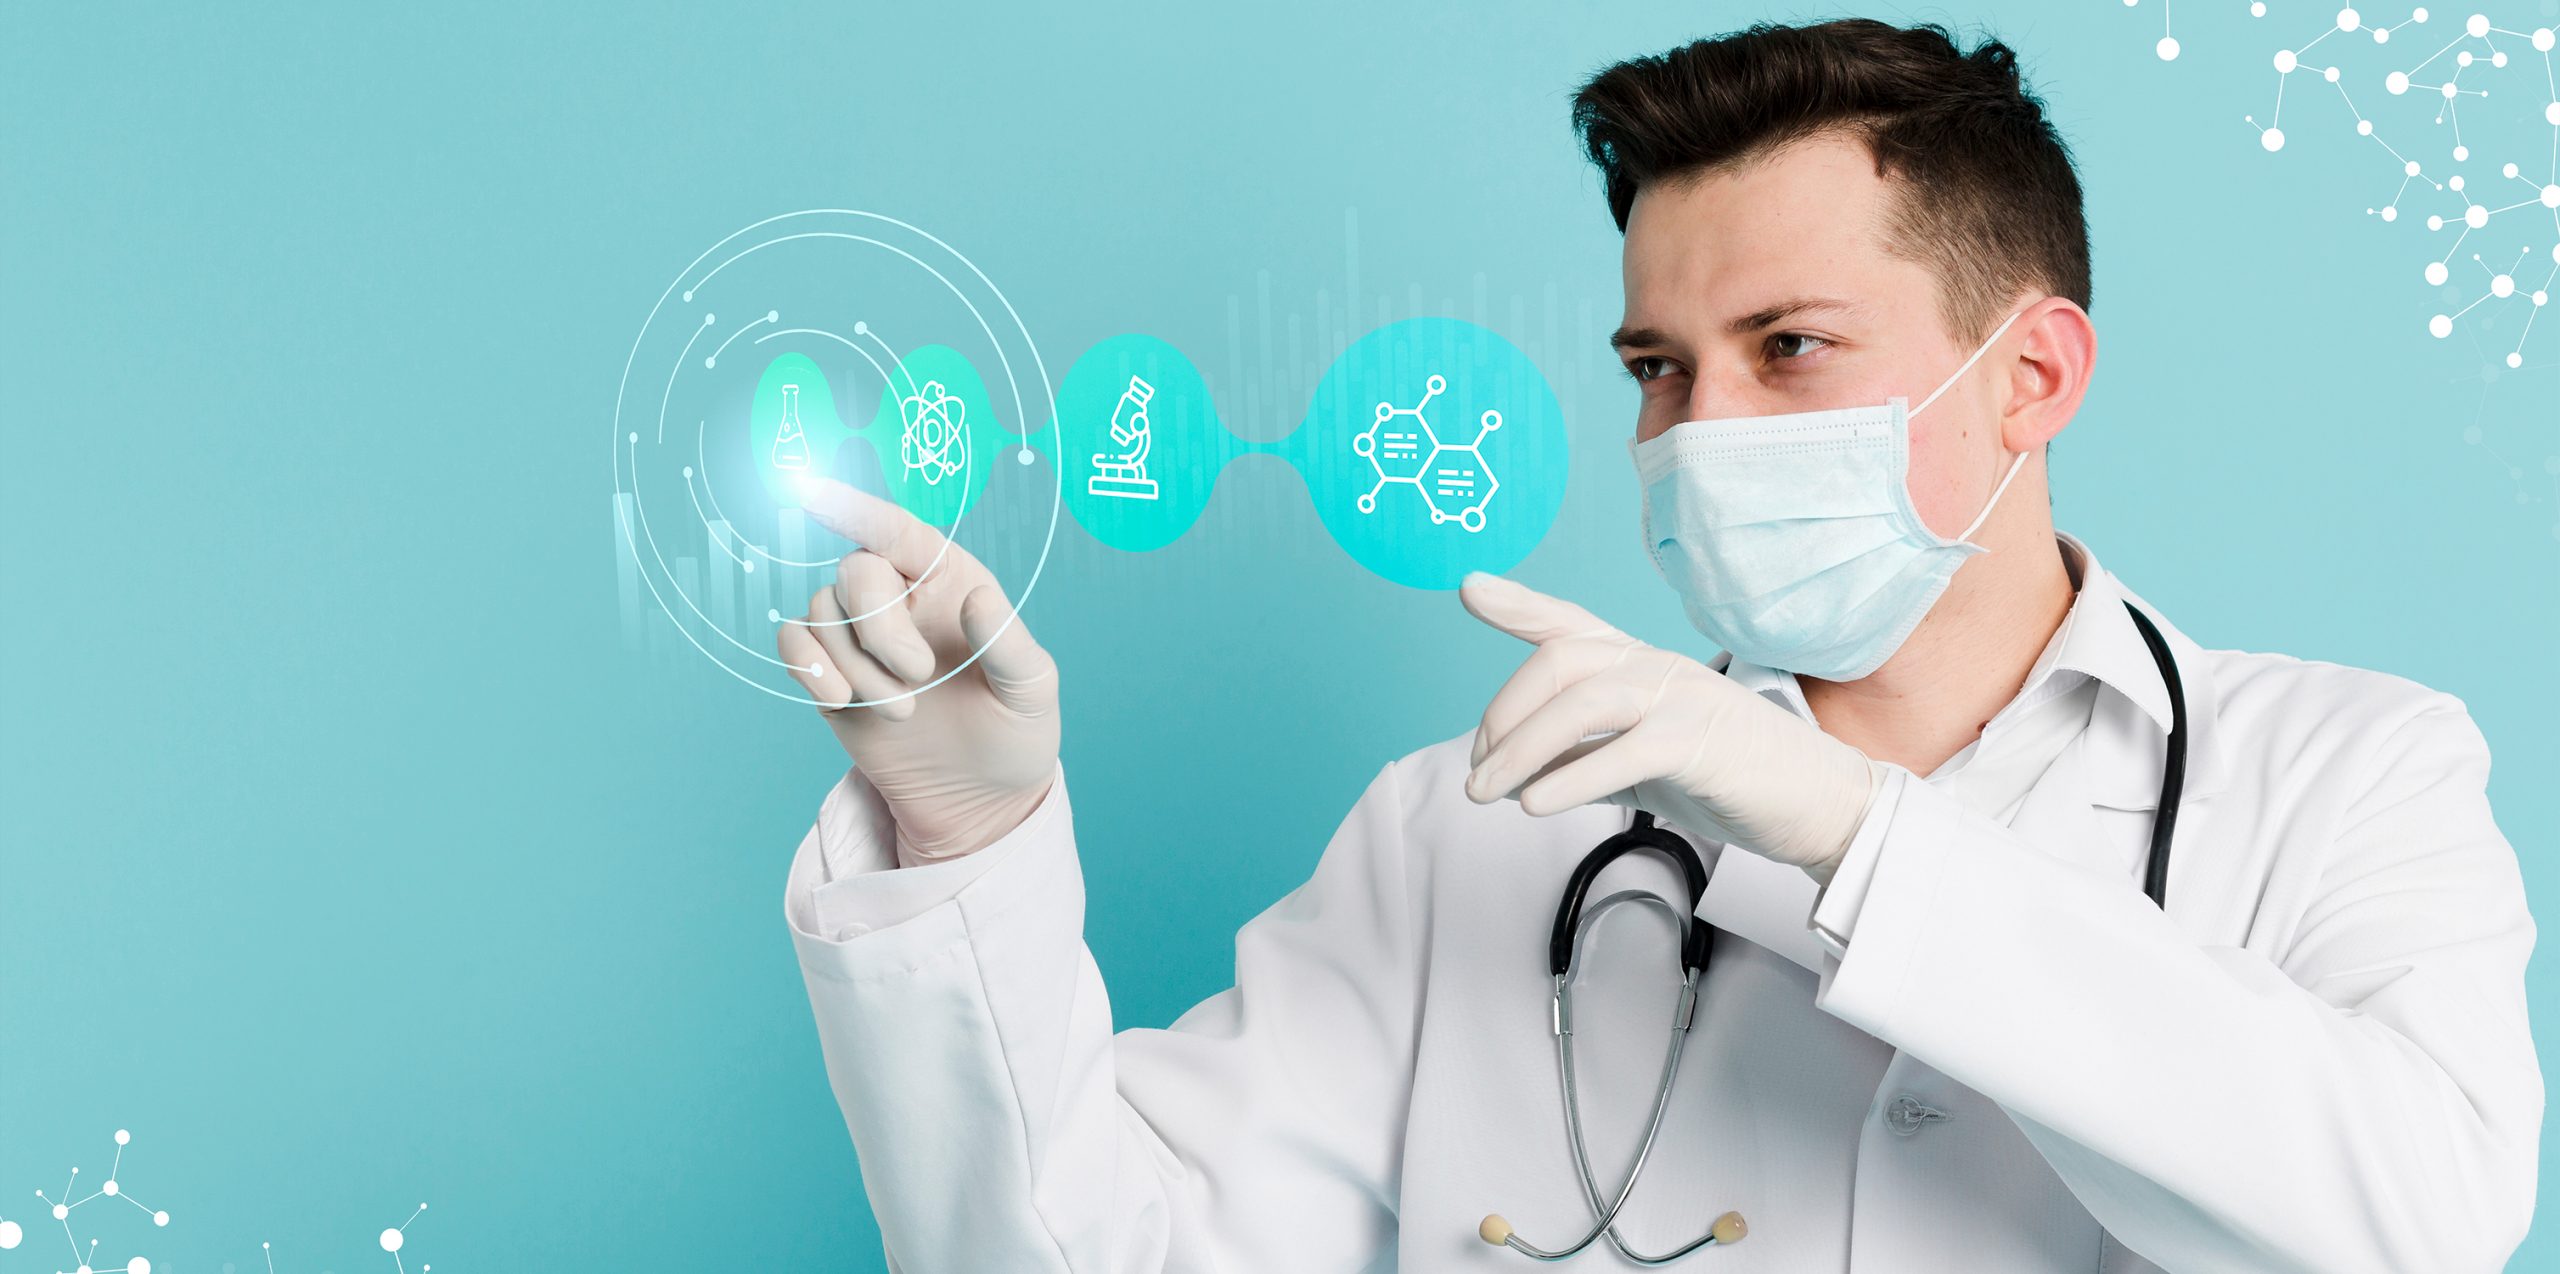 How can healthcare providers use AI to better connect with their patients?